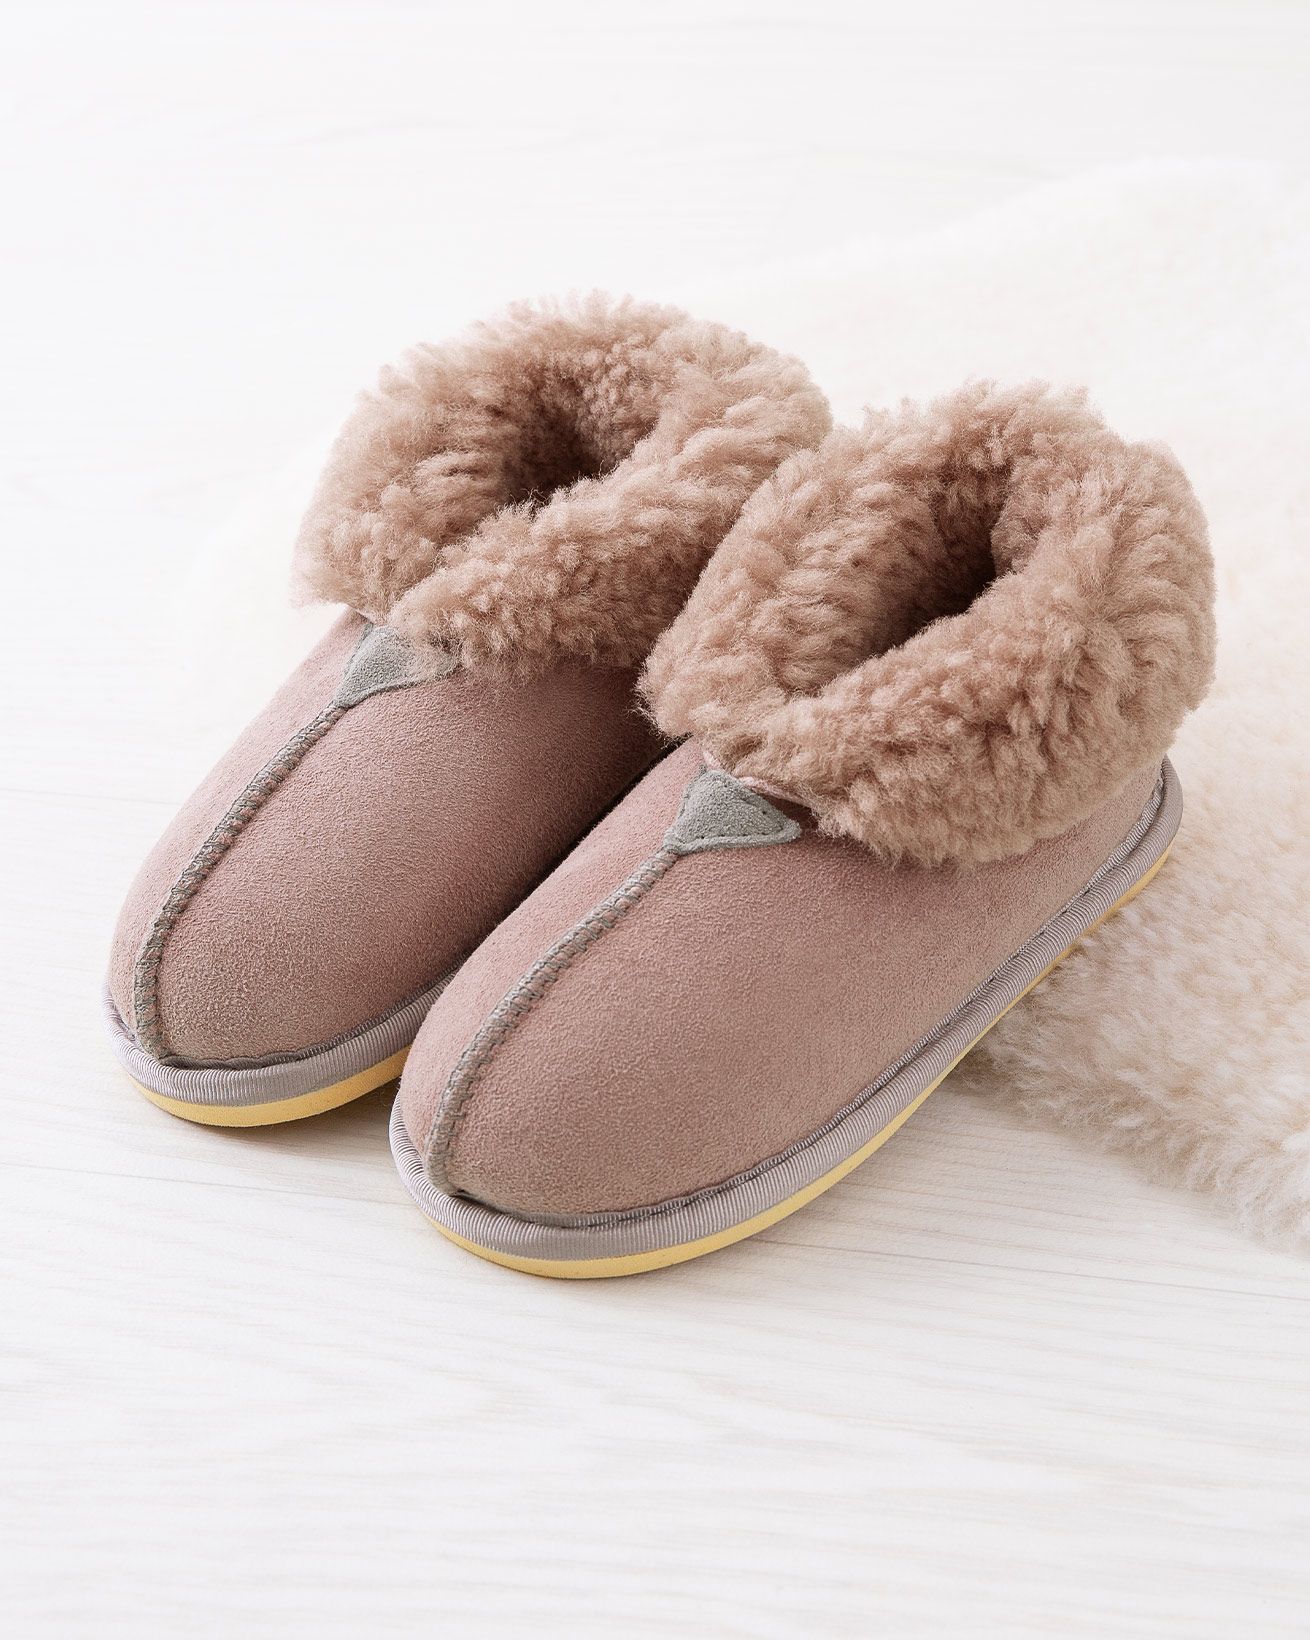 2460_kids-bootee-slippers_dusty-pink_lifestyle_lfs.jpg